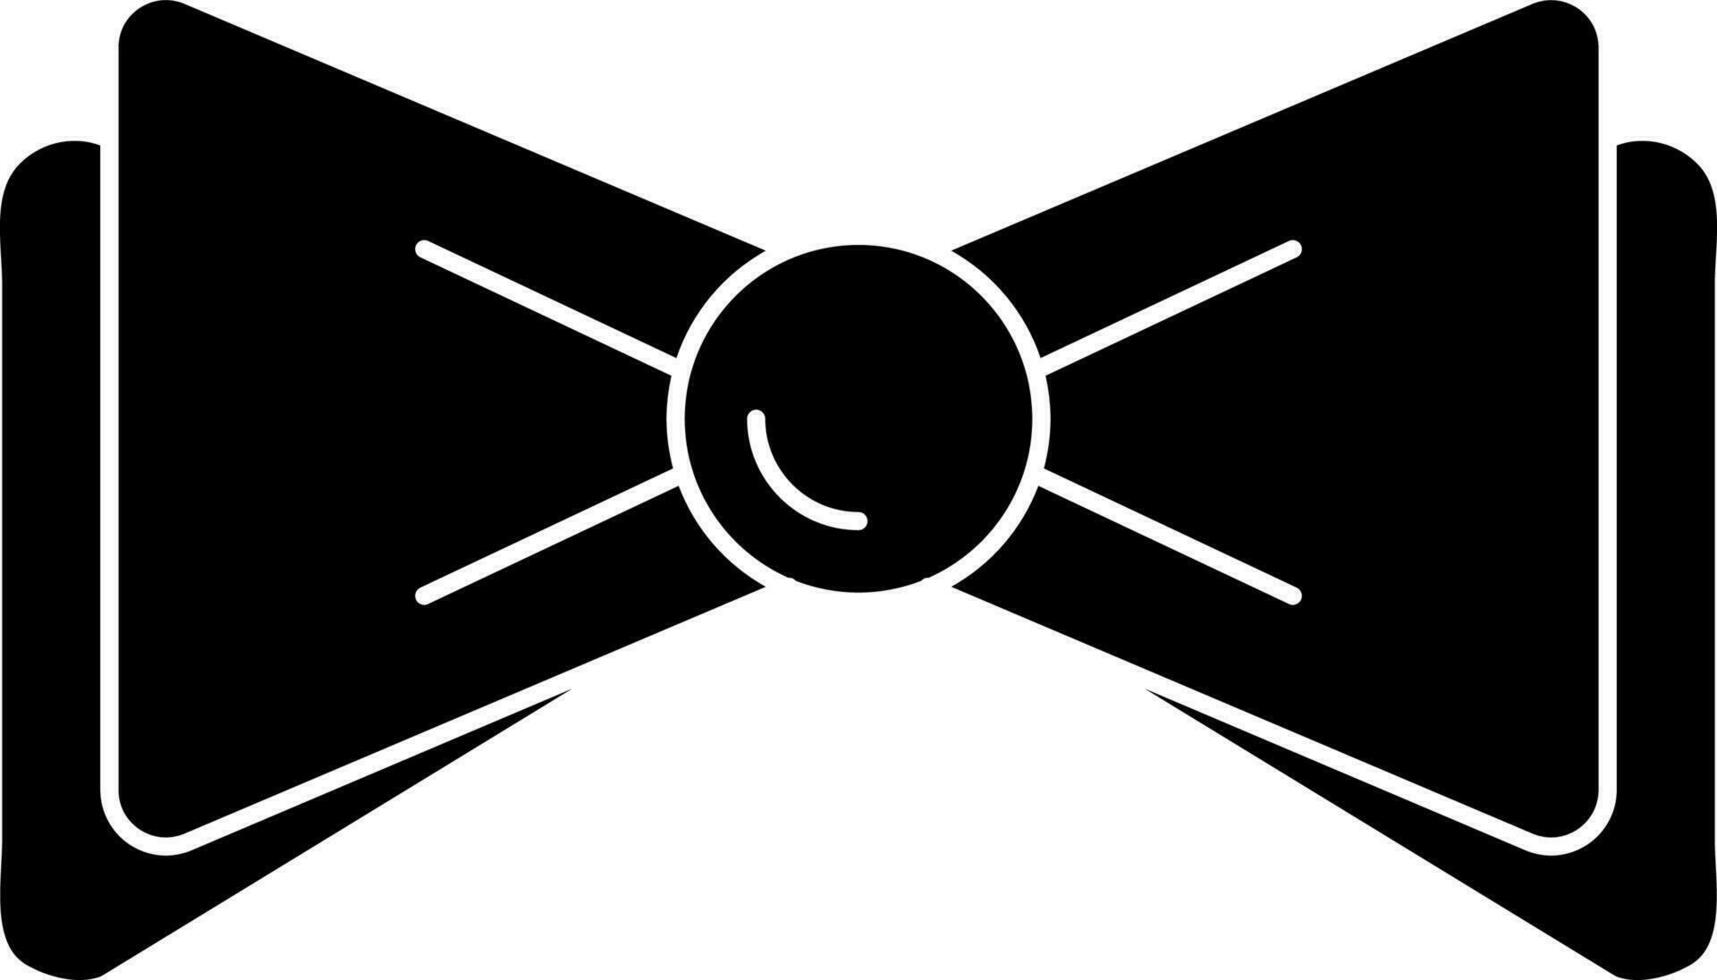 Illustration of bow tie icon in Black and White color. vector